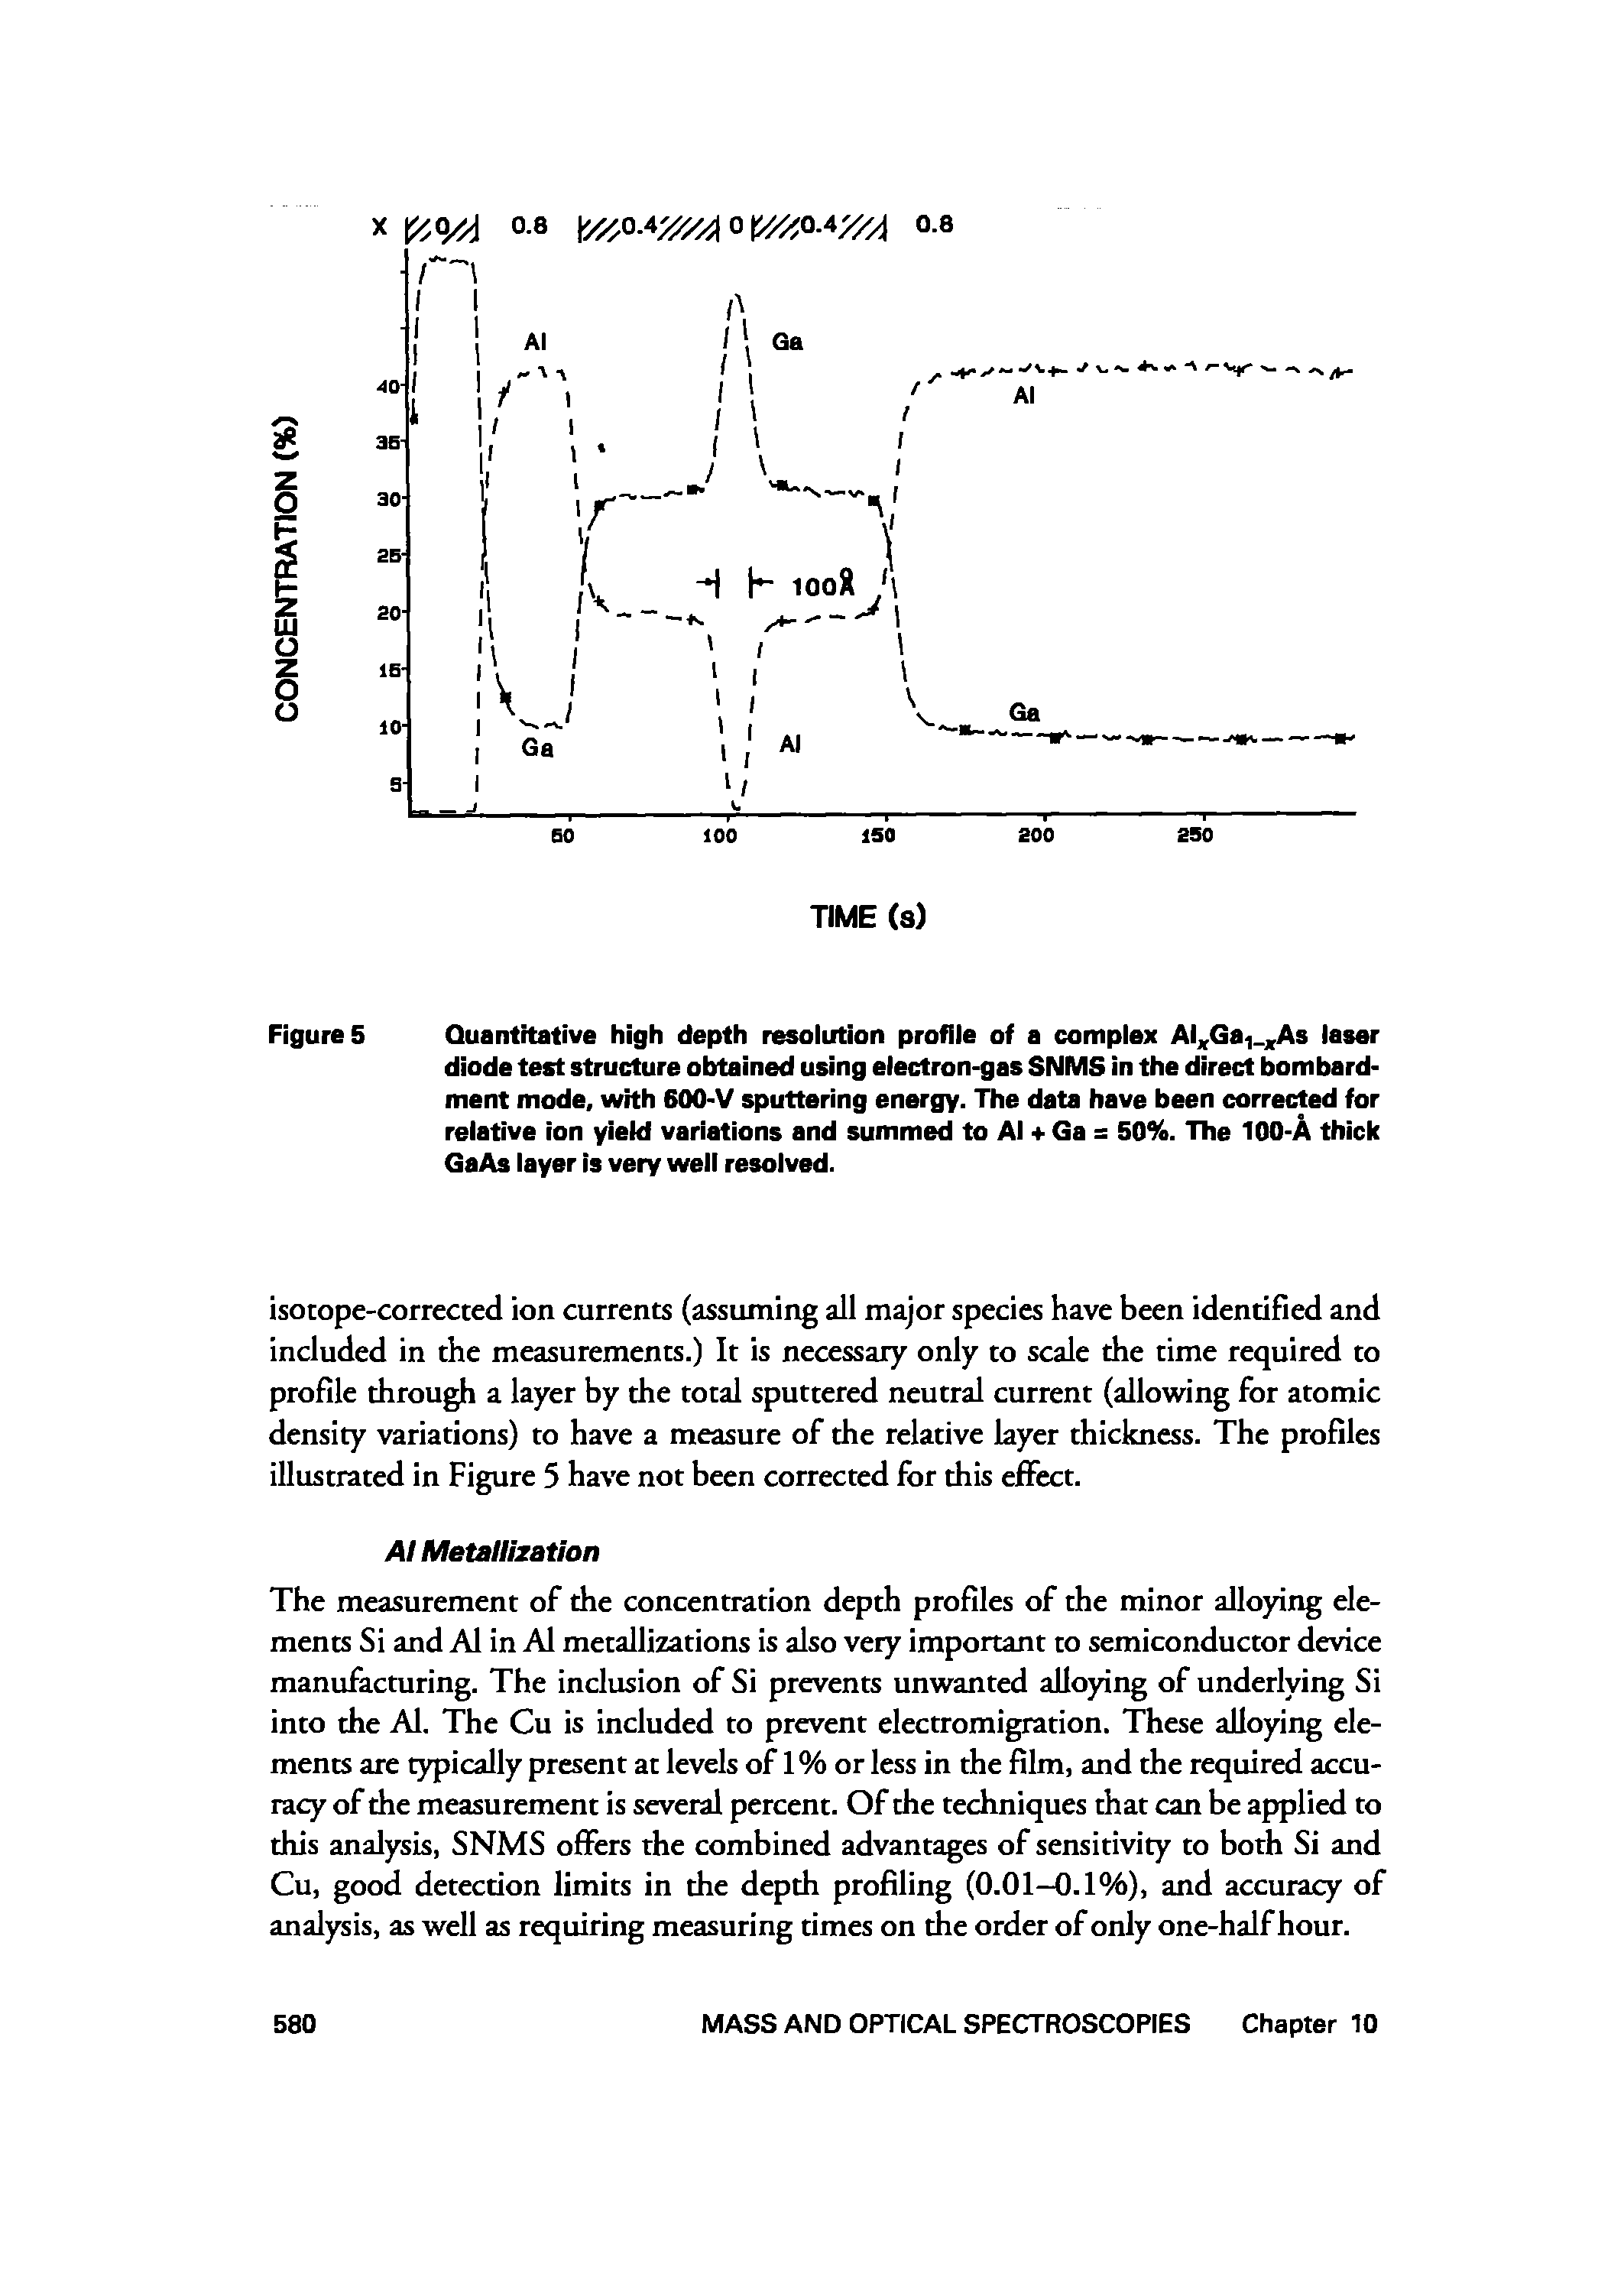 Figures Quantitative high depth resoiution profile of a complex Ai Ga. j As laser diode test structure obtained using electron-gas SNMS in the direct bombardment mode, with 600-V sputtering energy. The data have been corrected for relative ion yield variations and summed to Al + Ga = 50%. The 100-A thick GaAs layer is very well resolved.